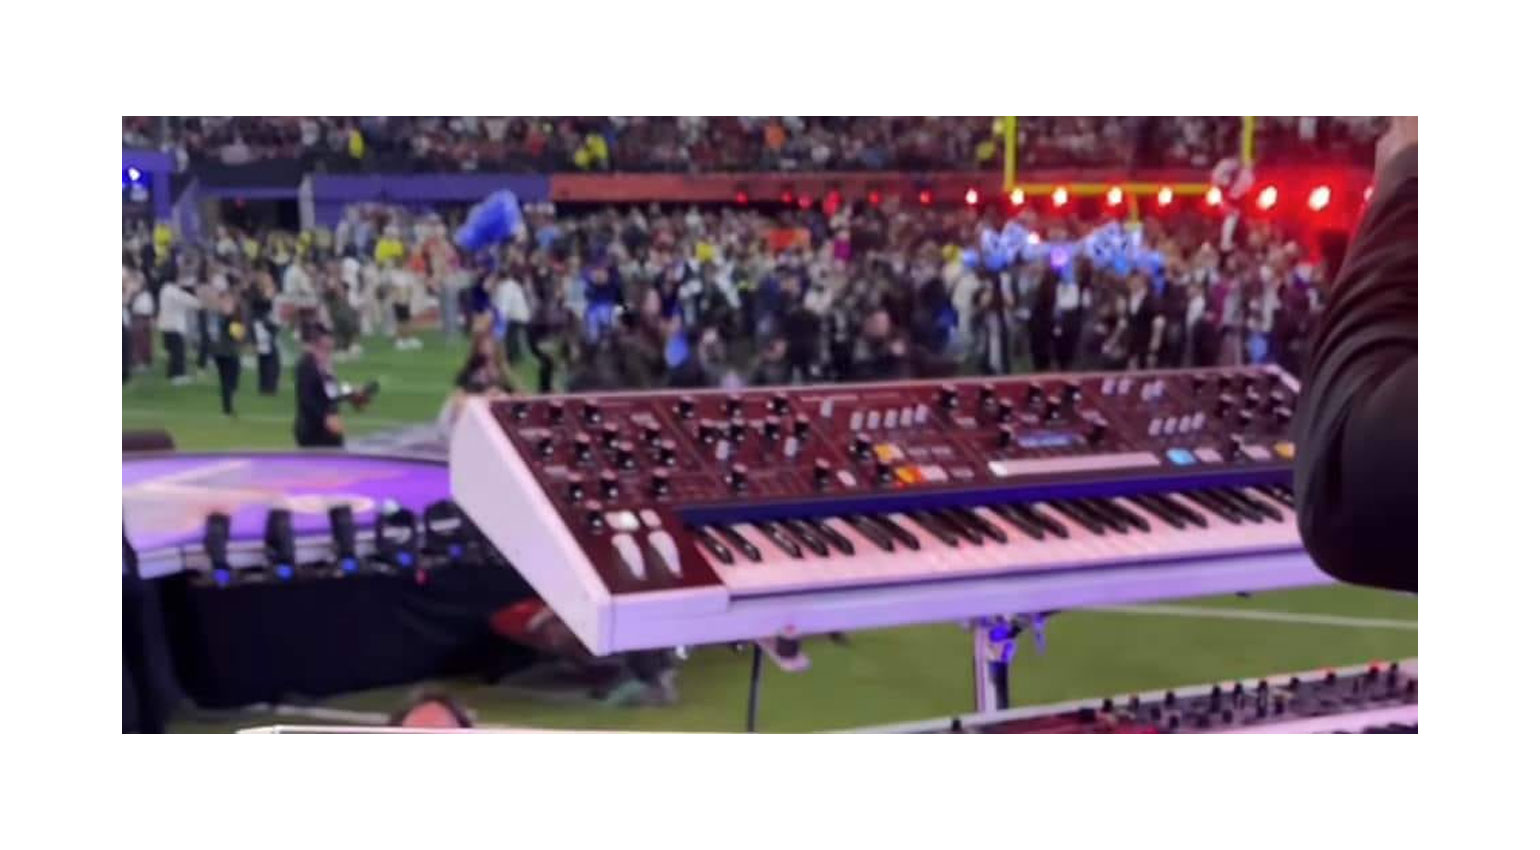 Moog teases new synth during Super Bowl halftime show